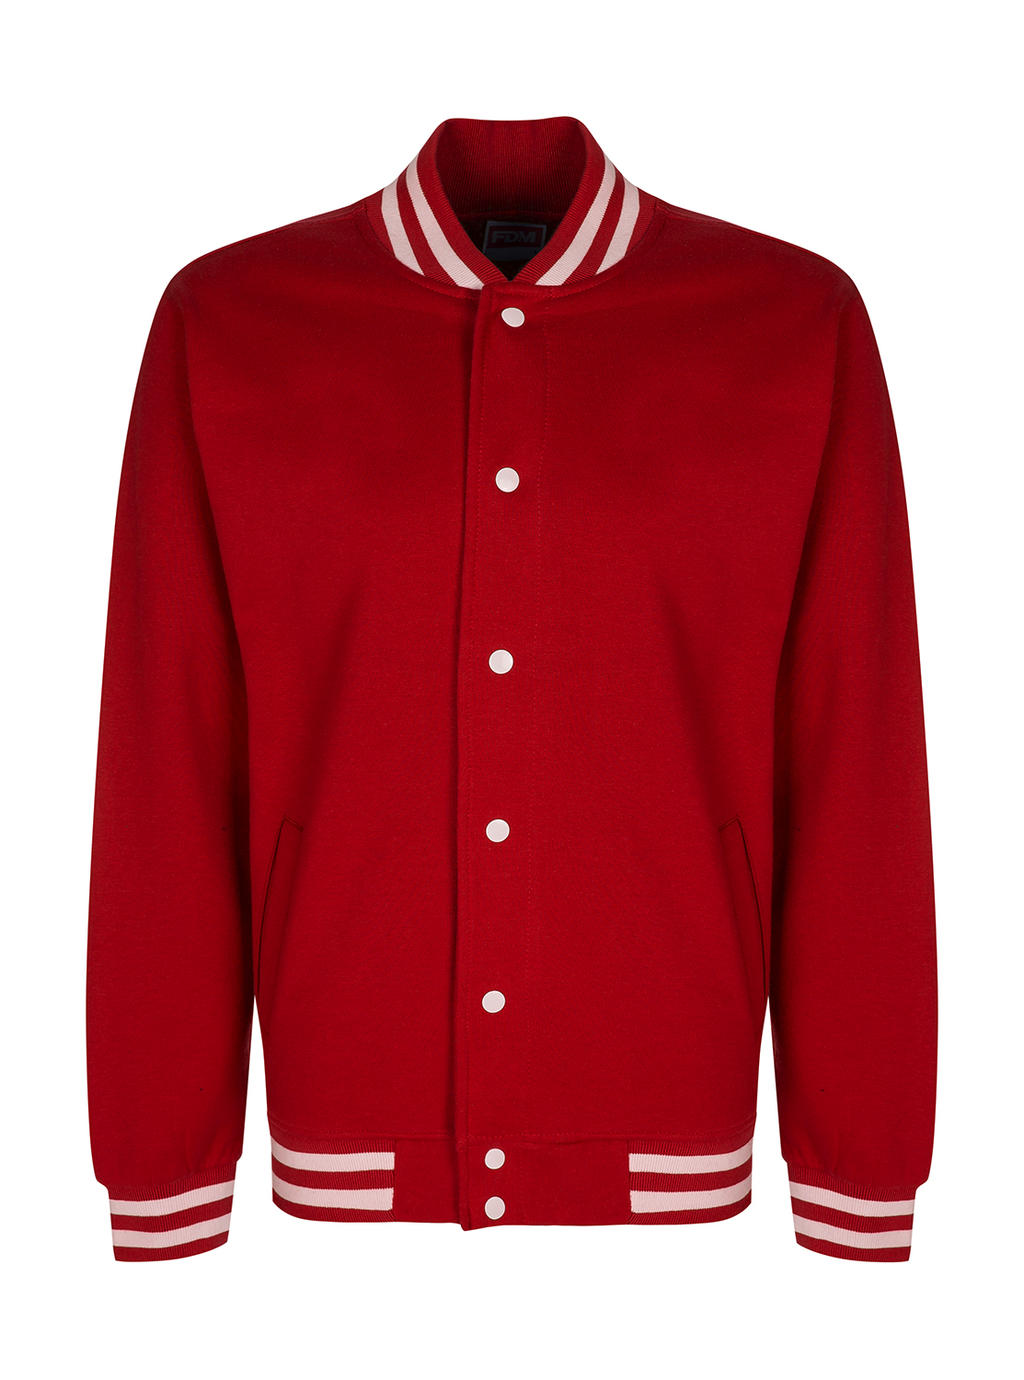  Campus Jacket in Farbe Fire Red/White